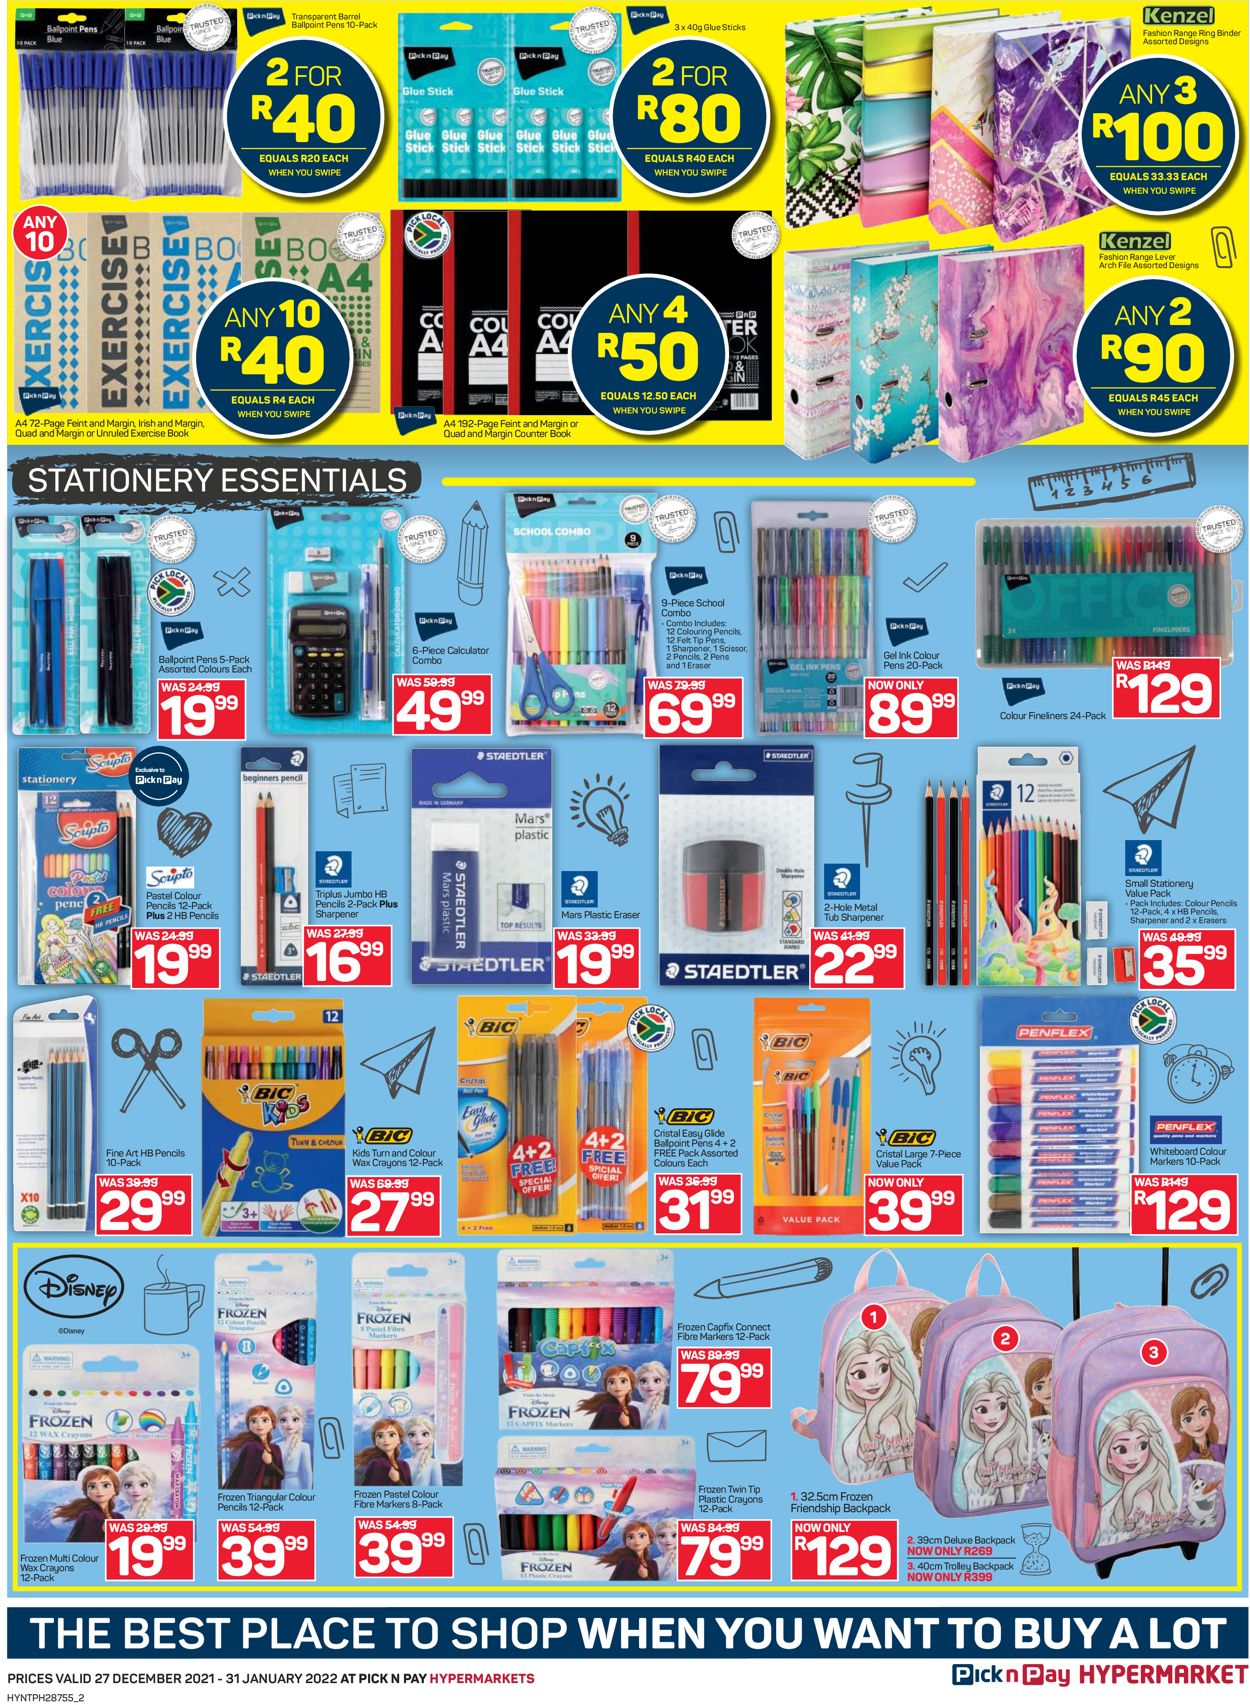 Pick n Pay Current catalogue 2021/12/27 2022/01/31 [2]